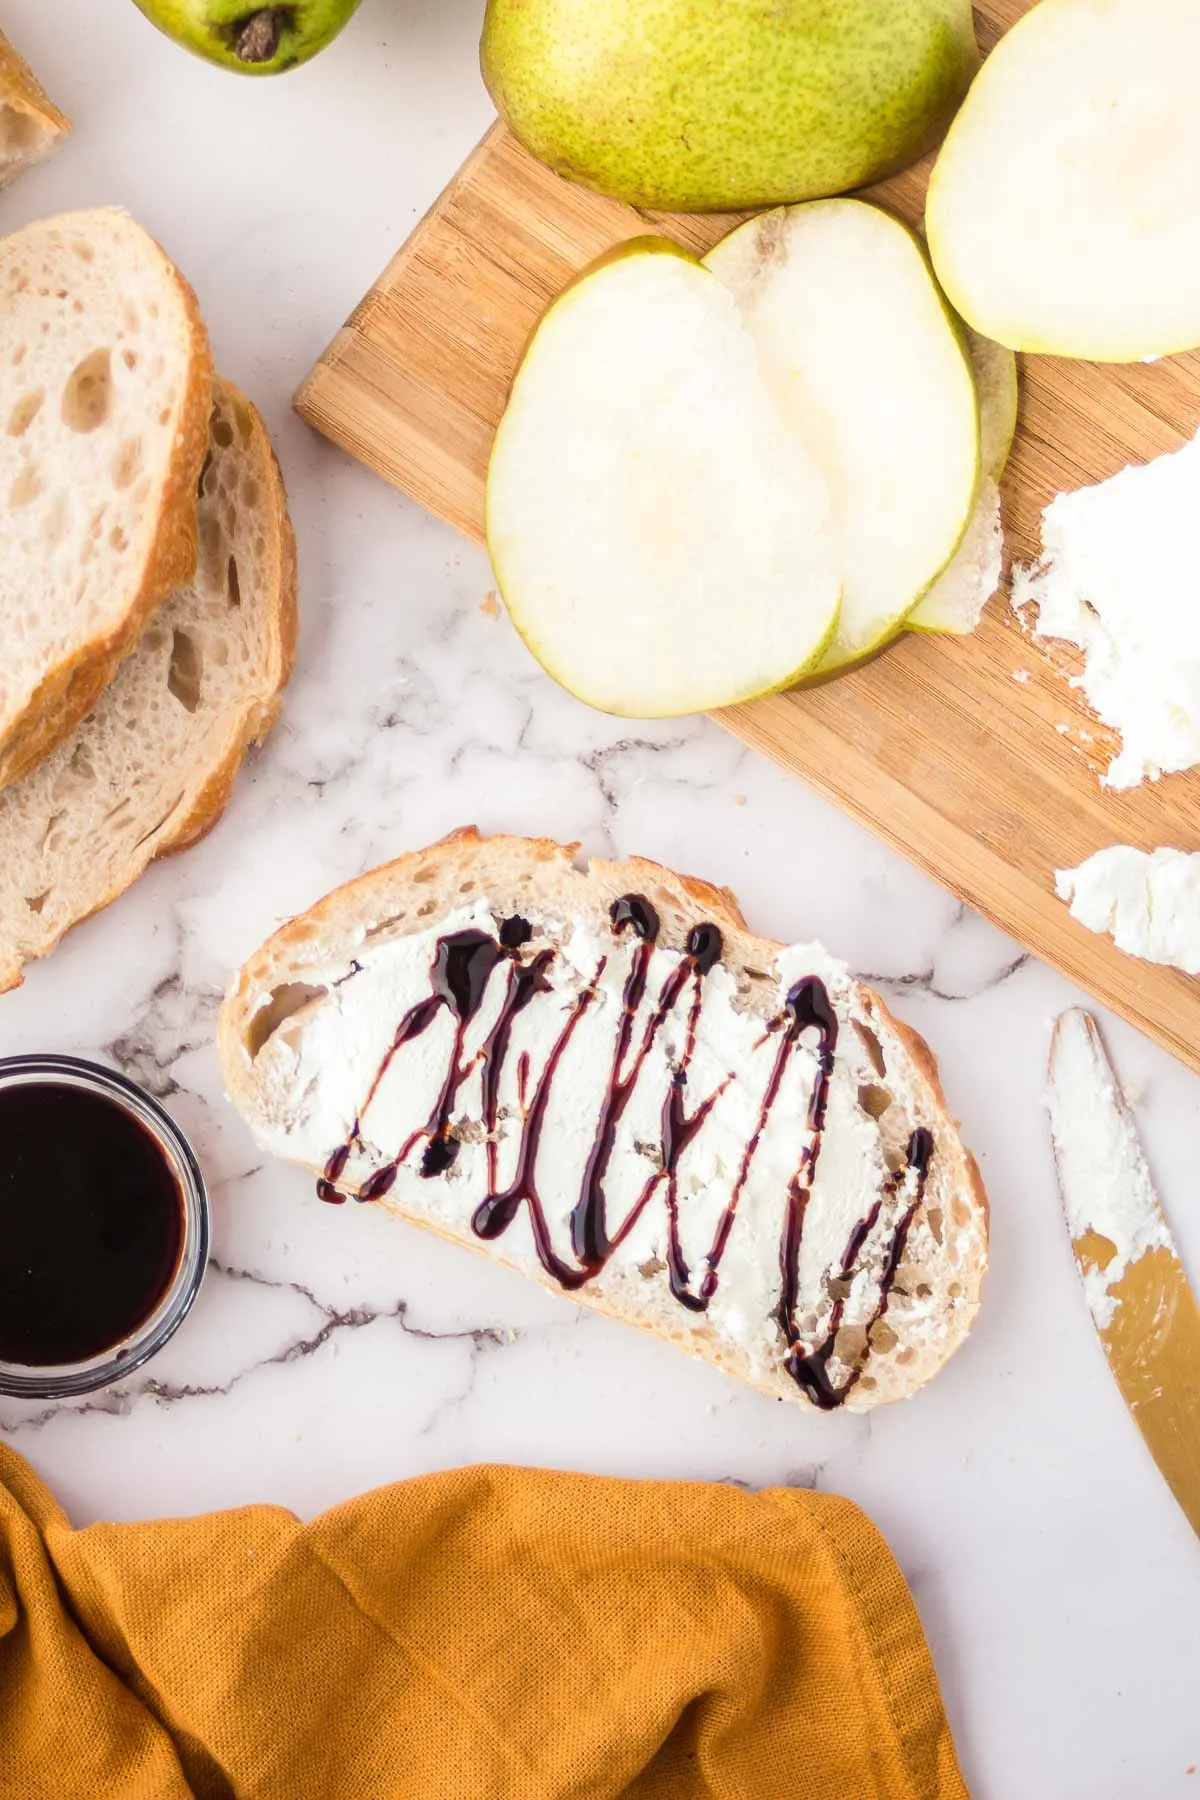 Goat cheese spread on bread and drizzled with balsamic glaze.